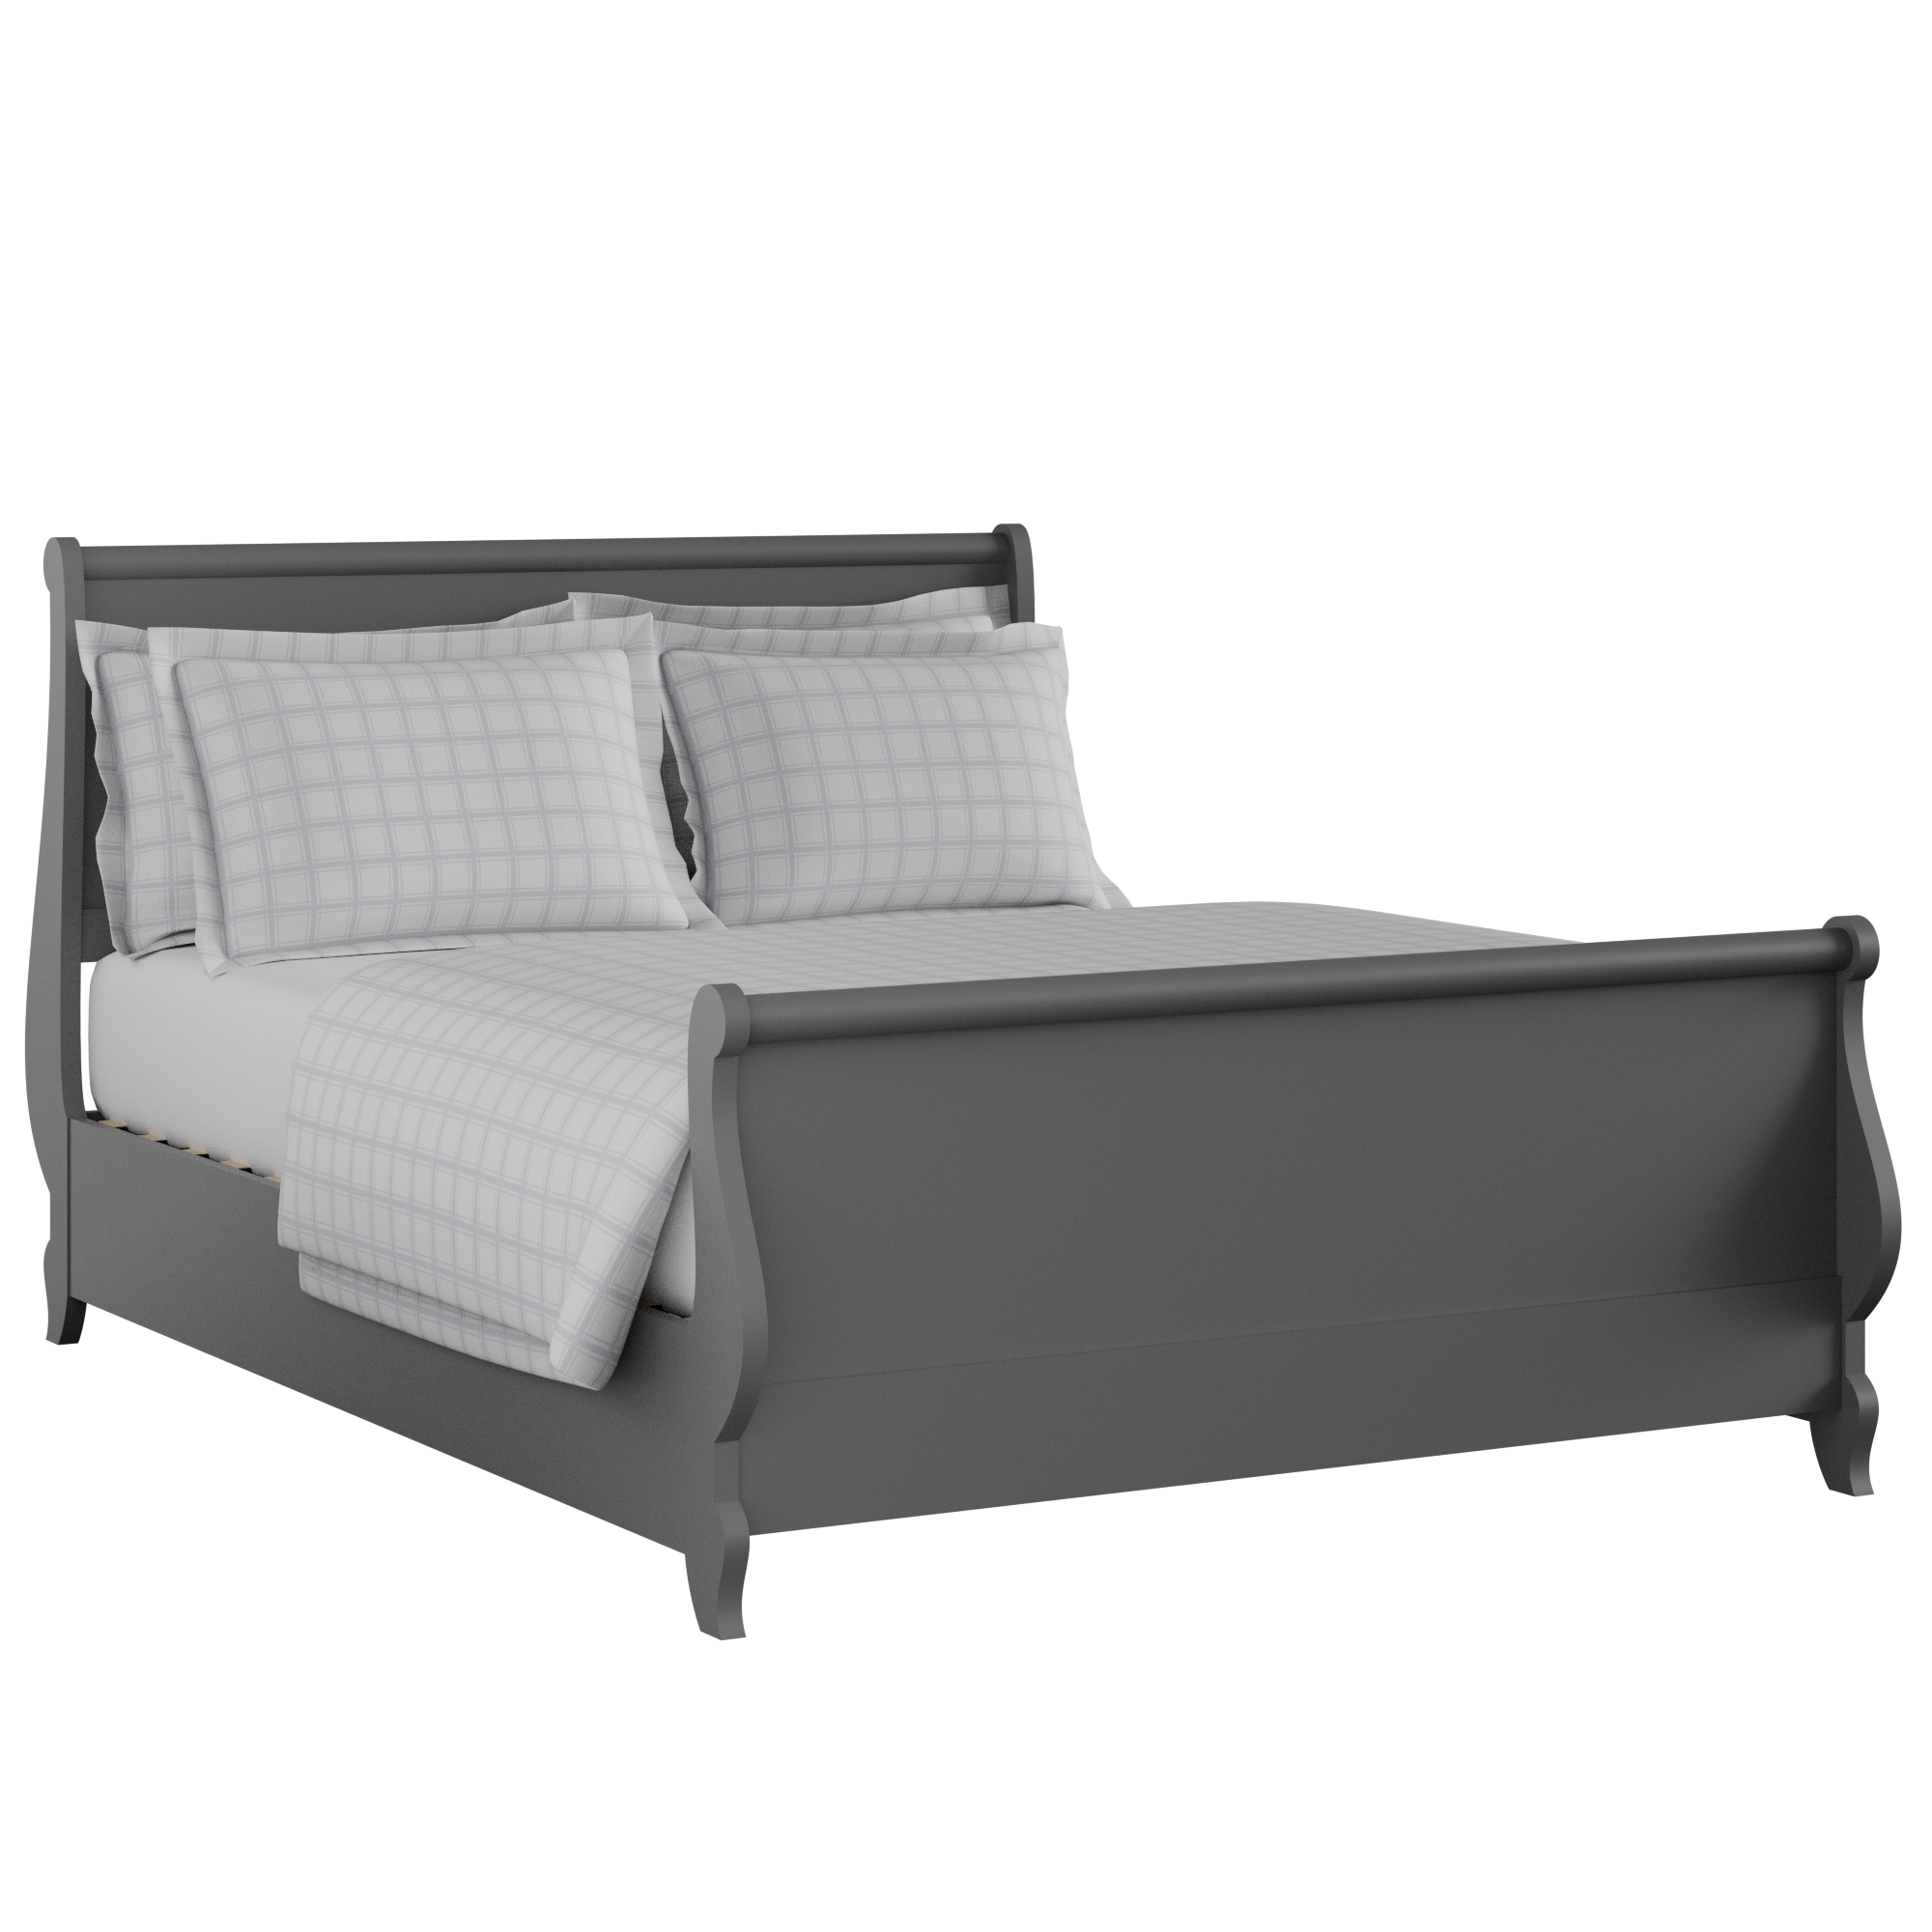 Elliot Painted painted wood bed in grey with Juno mattress